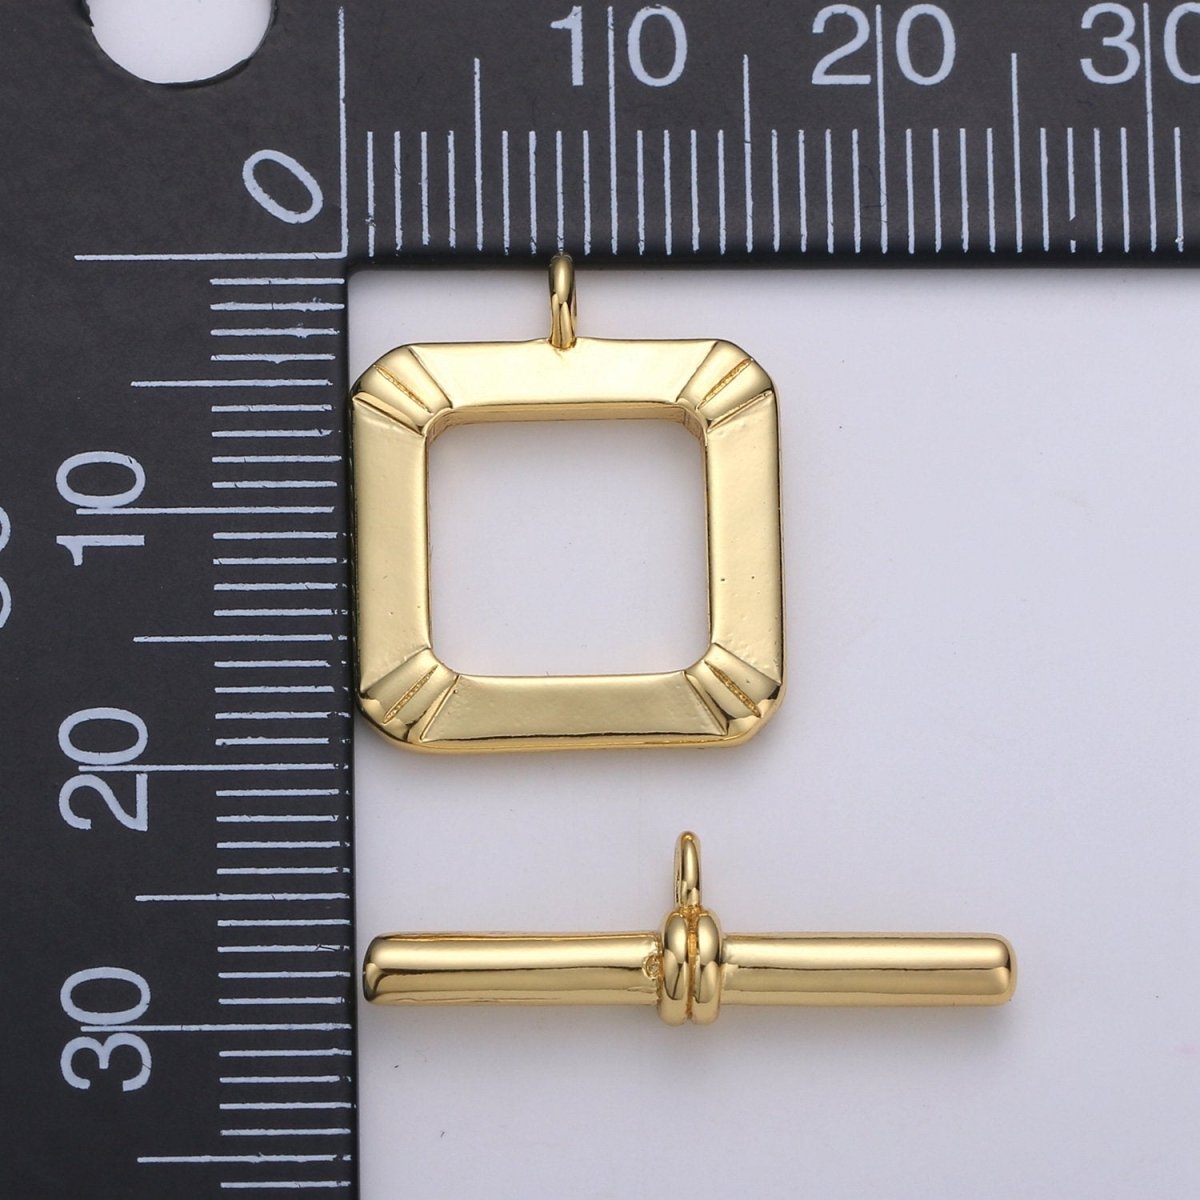 15mm 14K Gold Filled Toggle Clasp Square ot Clasp for Jewelry Making Supply K-829 - DLUXCA